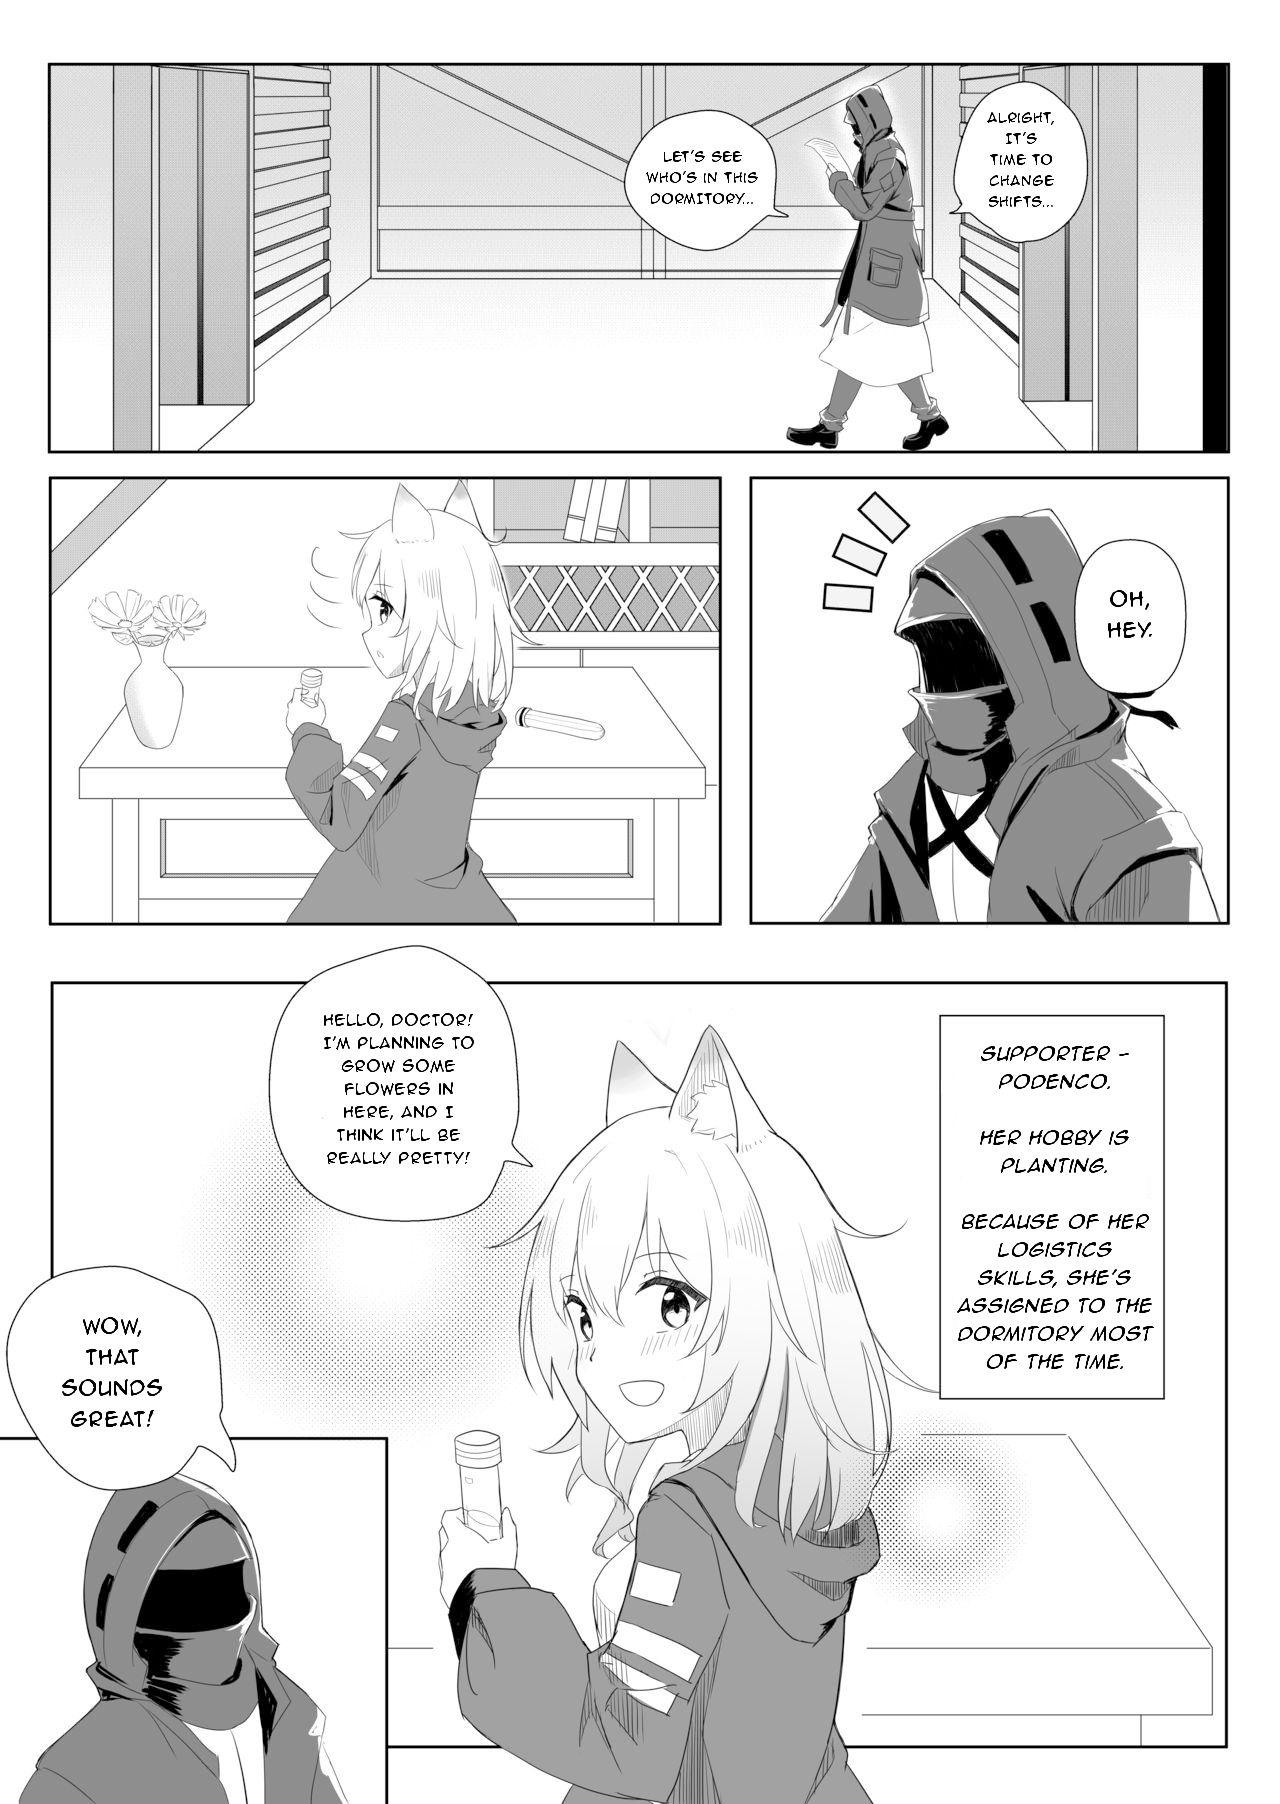 Caliente Podenco in heat - Arknights Tinytits - Page 2